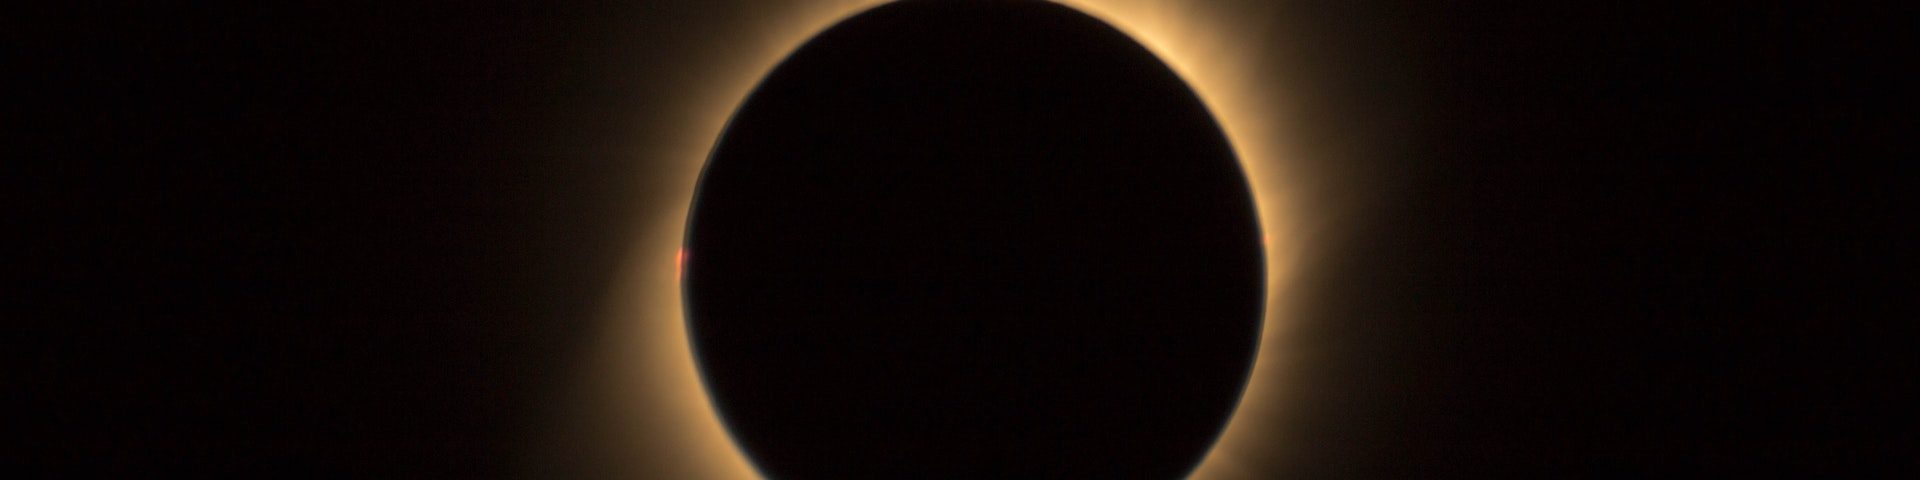 6 Fast Facts to Know About the Science Behind a Solar Eclipse